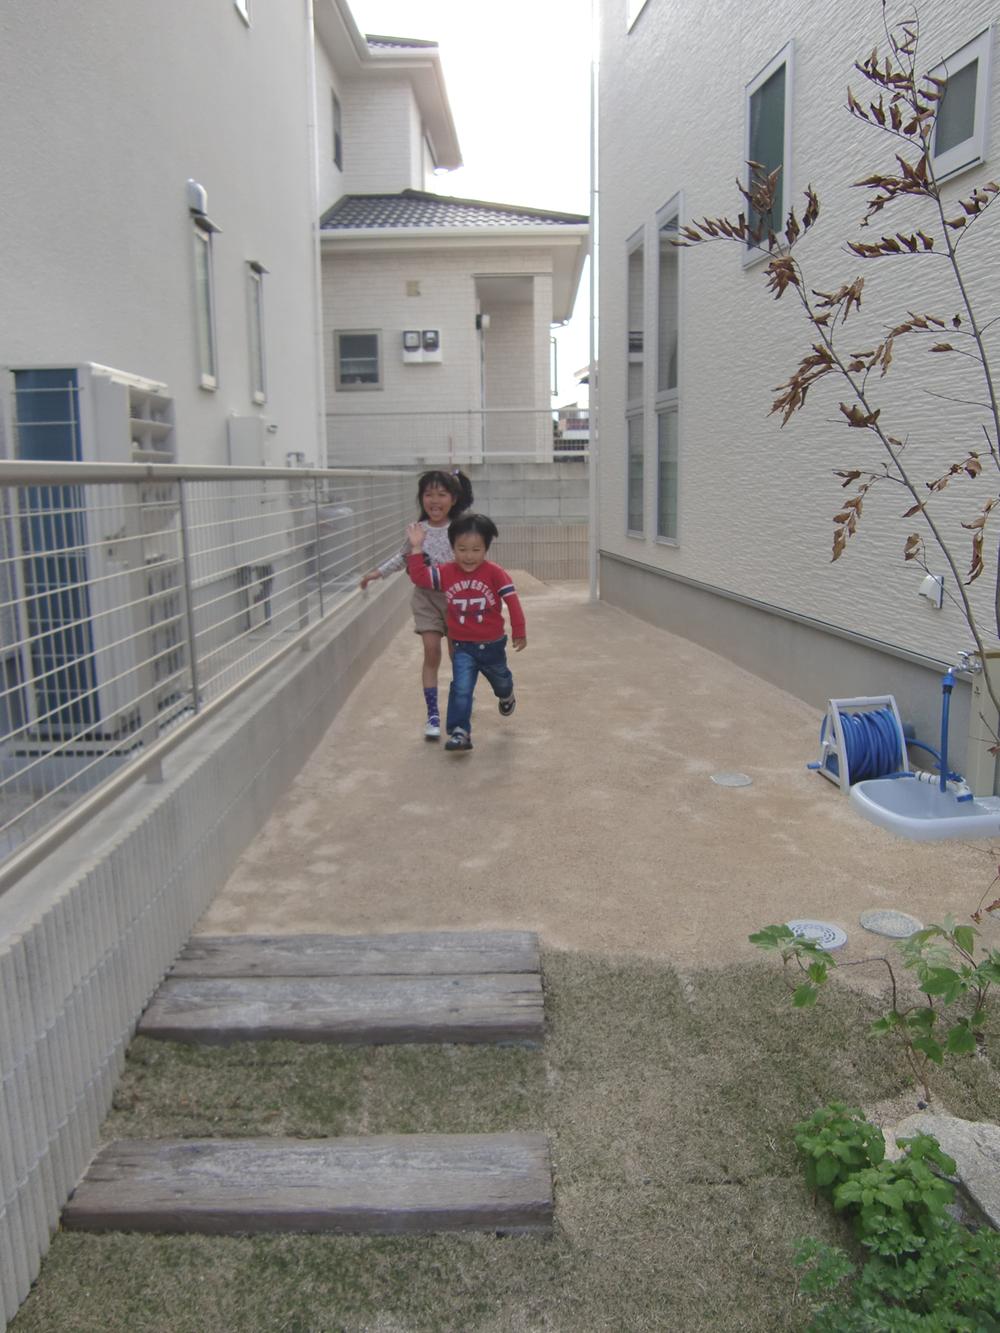 Garden. Since the garden there is a space, Also freely can be race children.